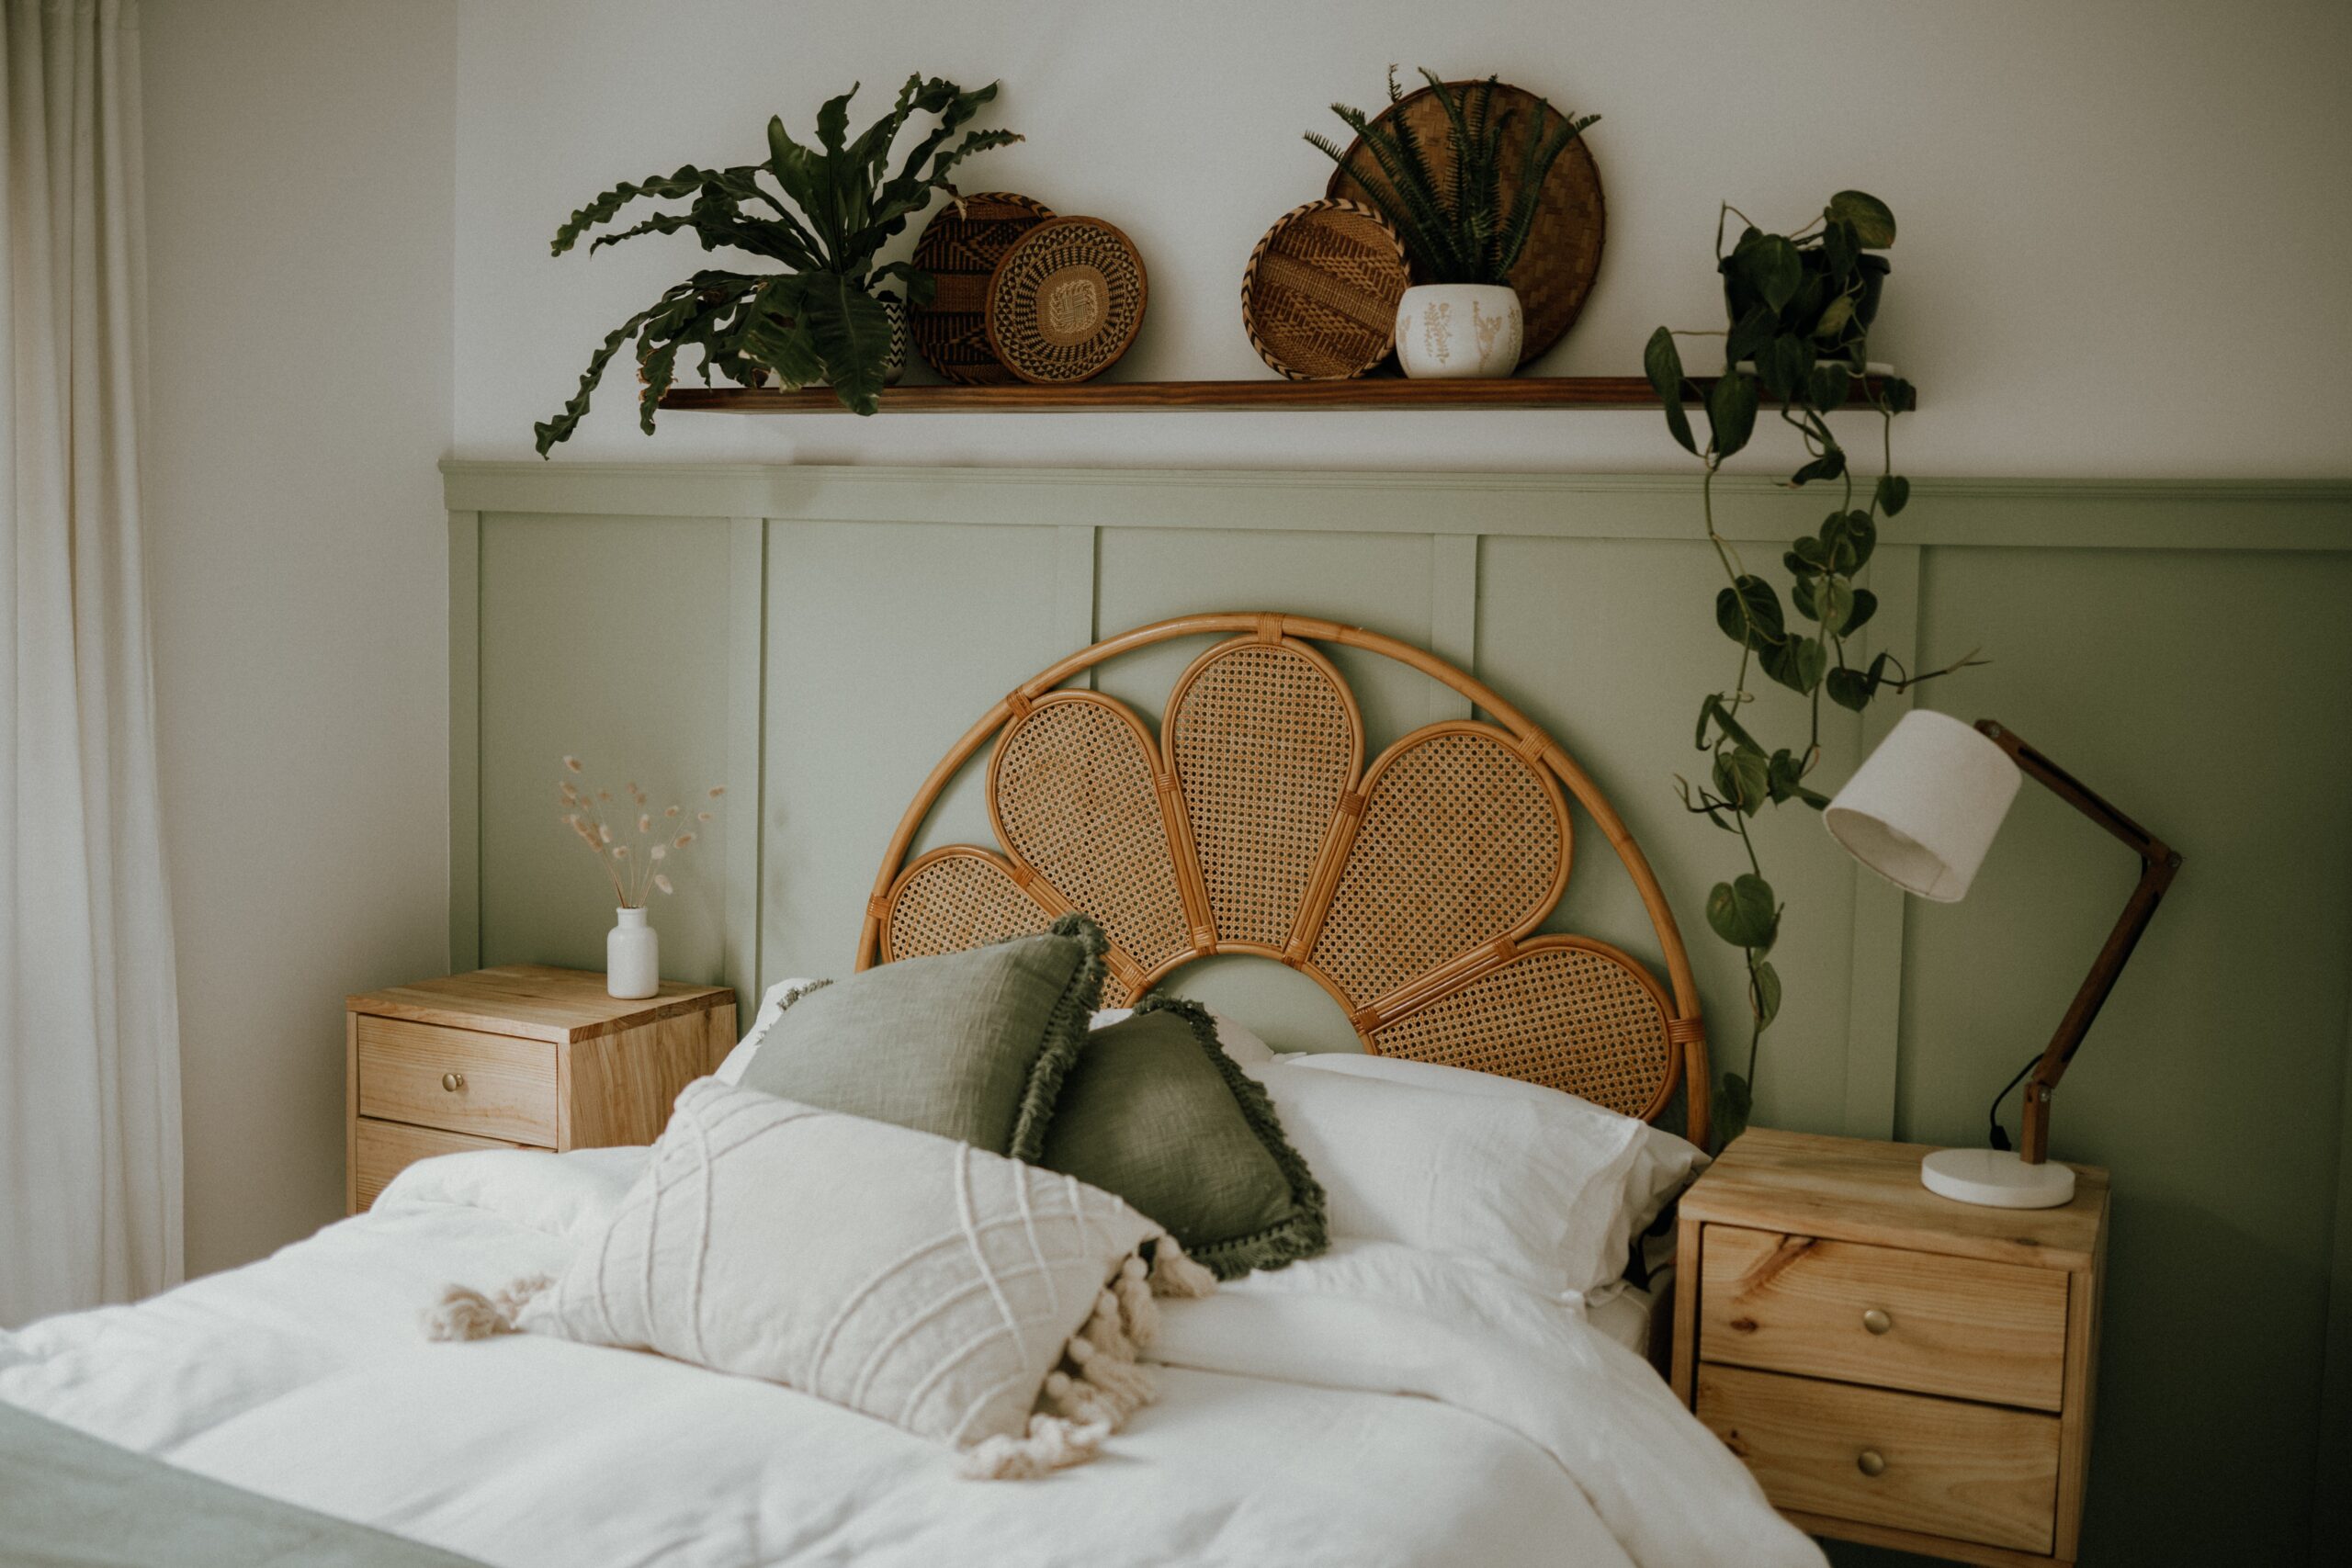 A sage green room with dark green pillows and leaf decor. Pictured: A bedroom.